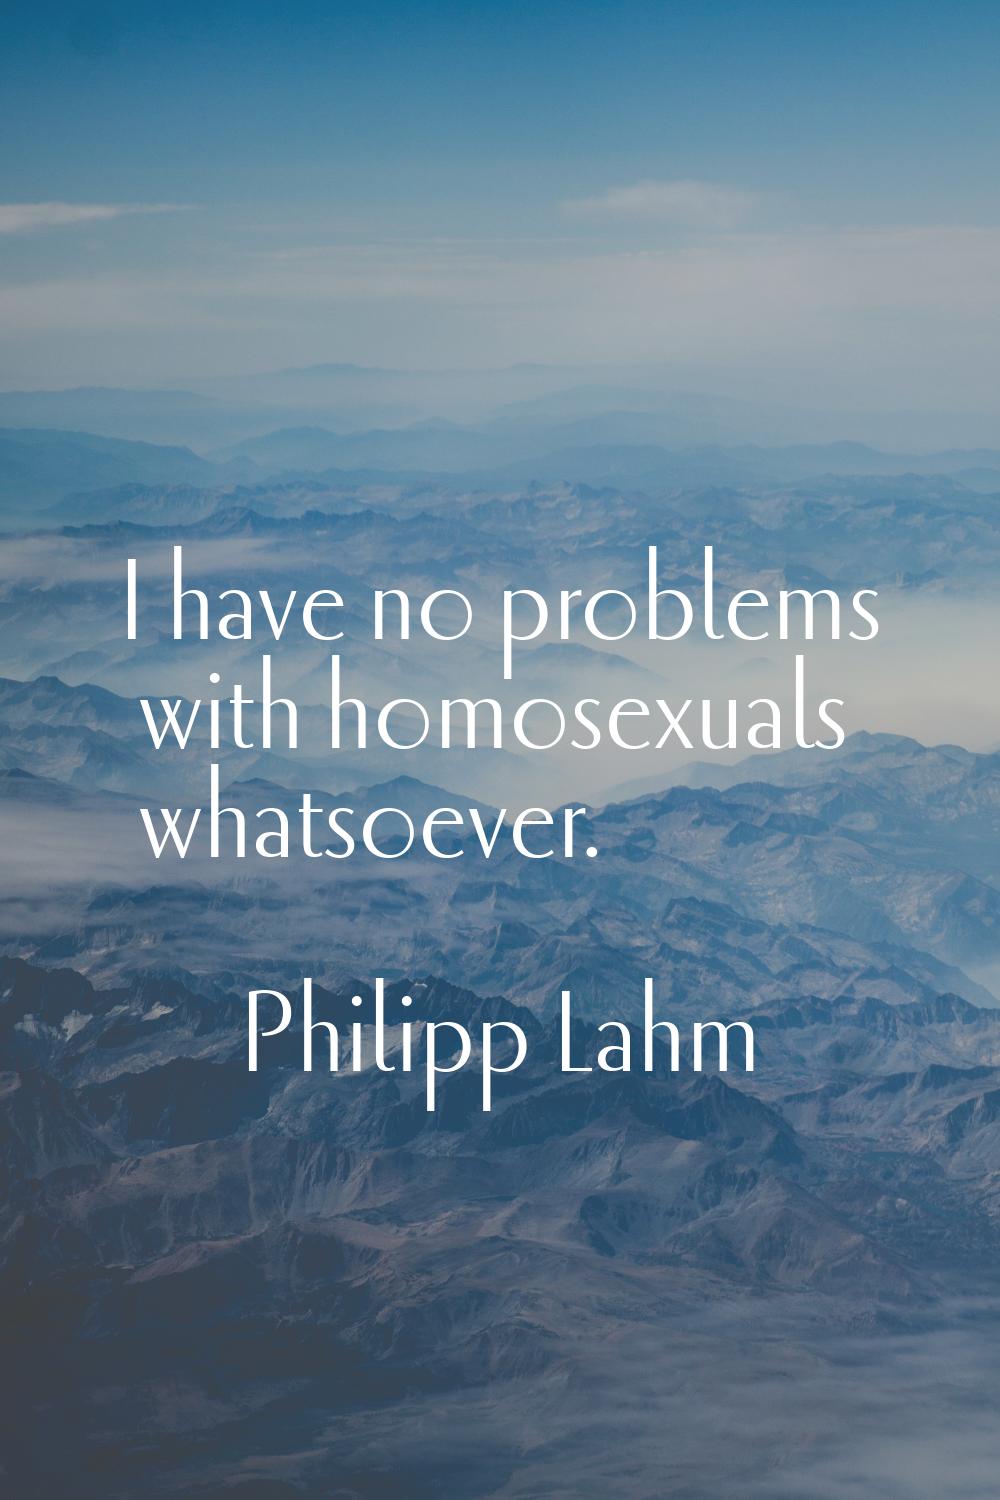 I have no problems with homosexuals whatsoever.